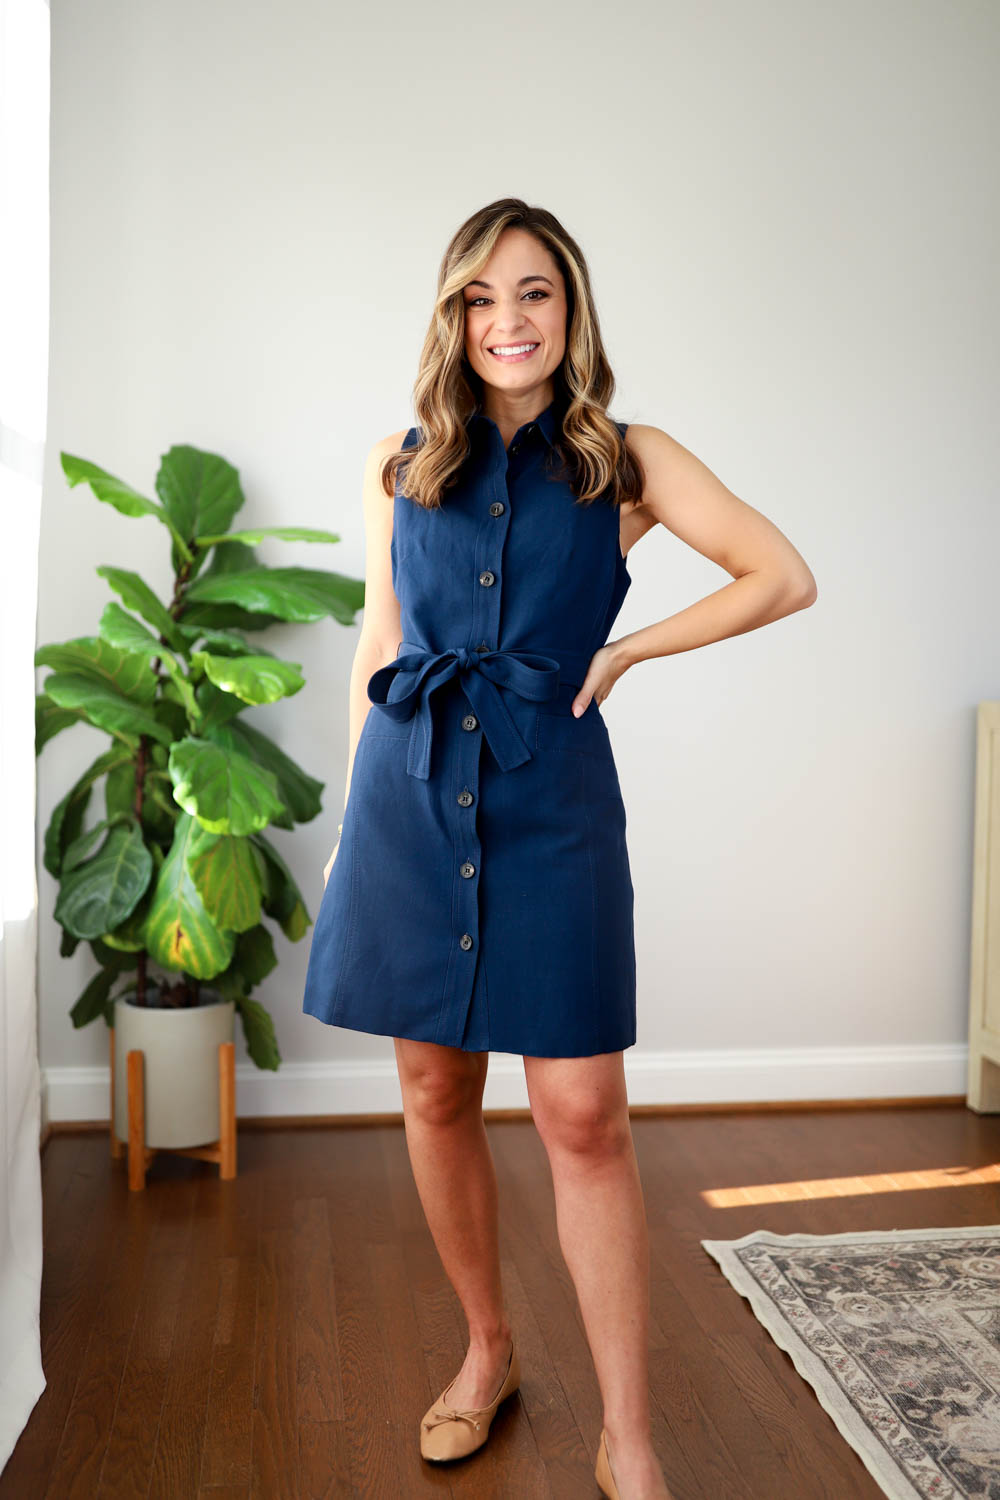 Petite friendly dress for work | petite style | summer dresses for work | linen dresses | summer outfits | business casual dresses 